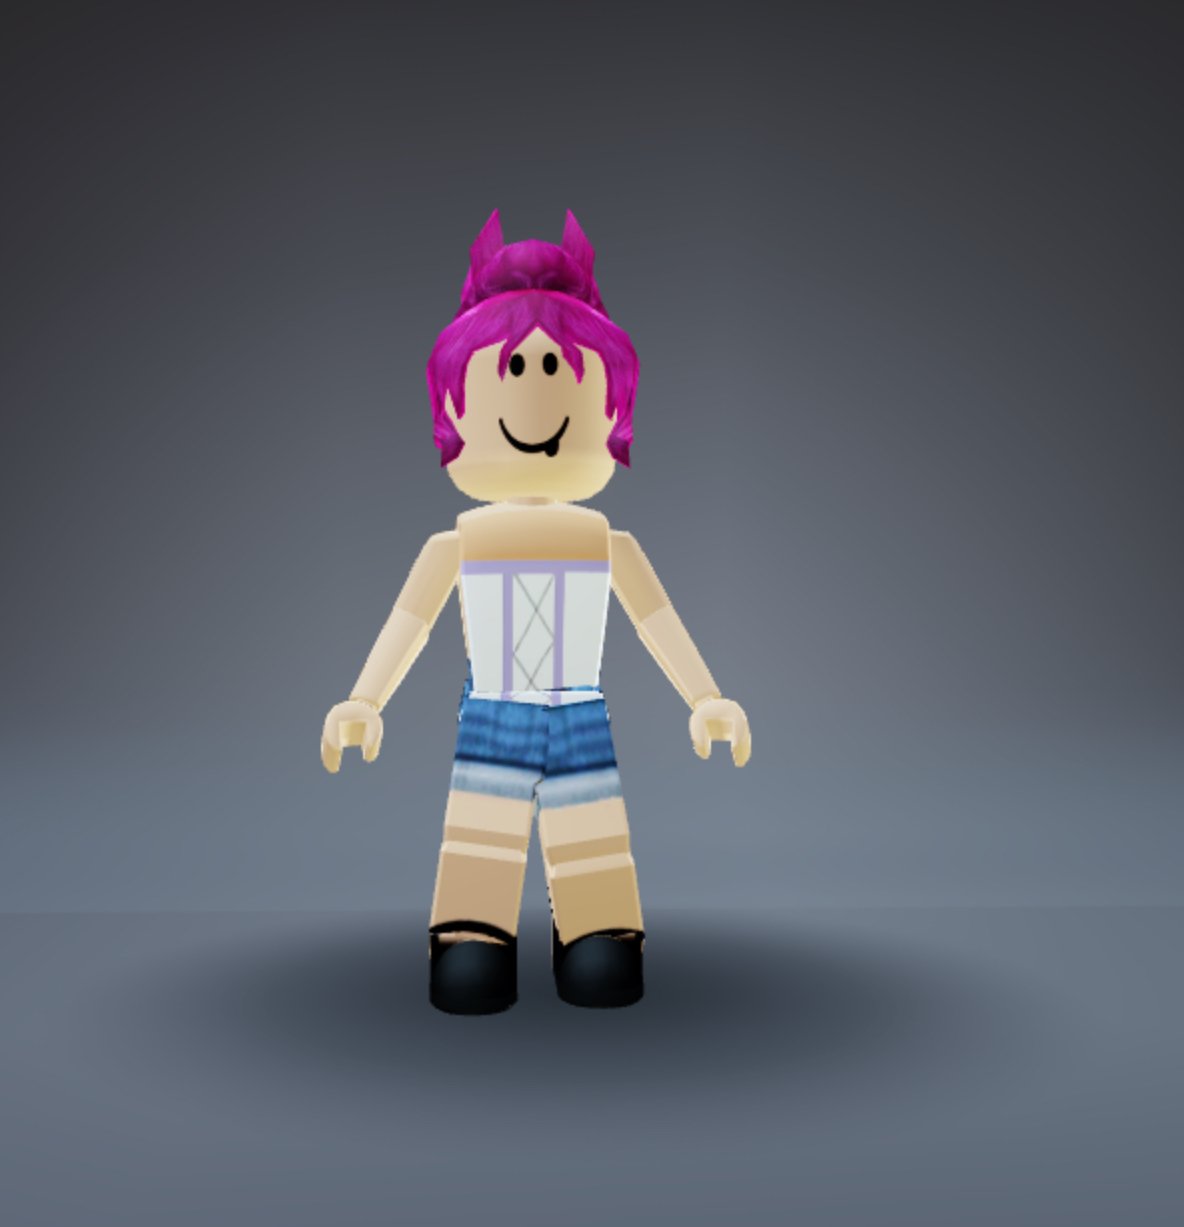 Www Robloxfits Com Roblox Fits - roblox cute outfits free